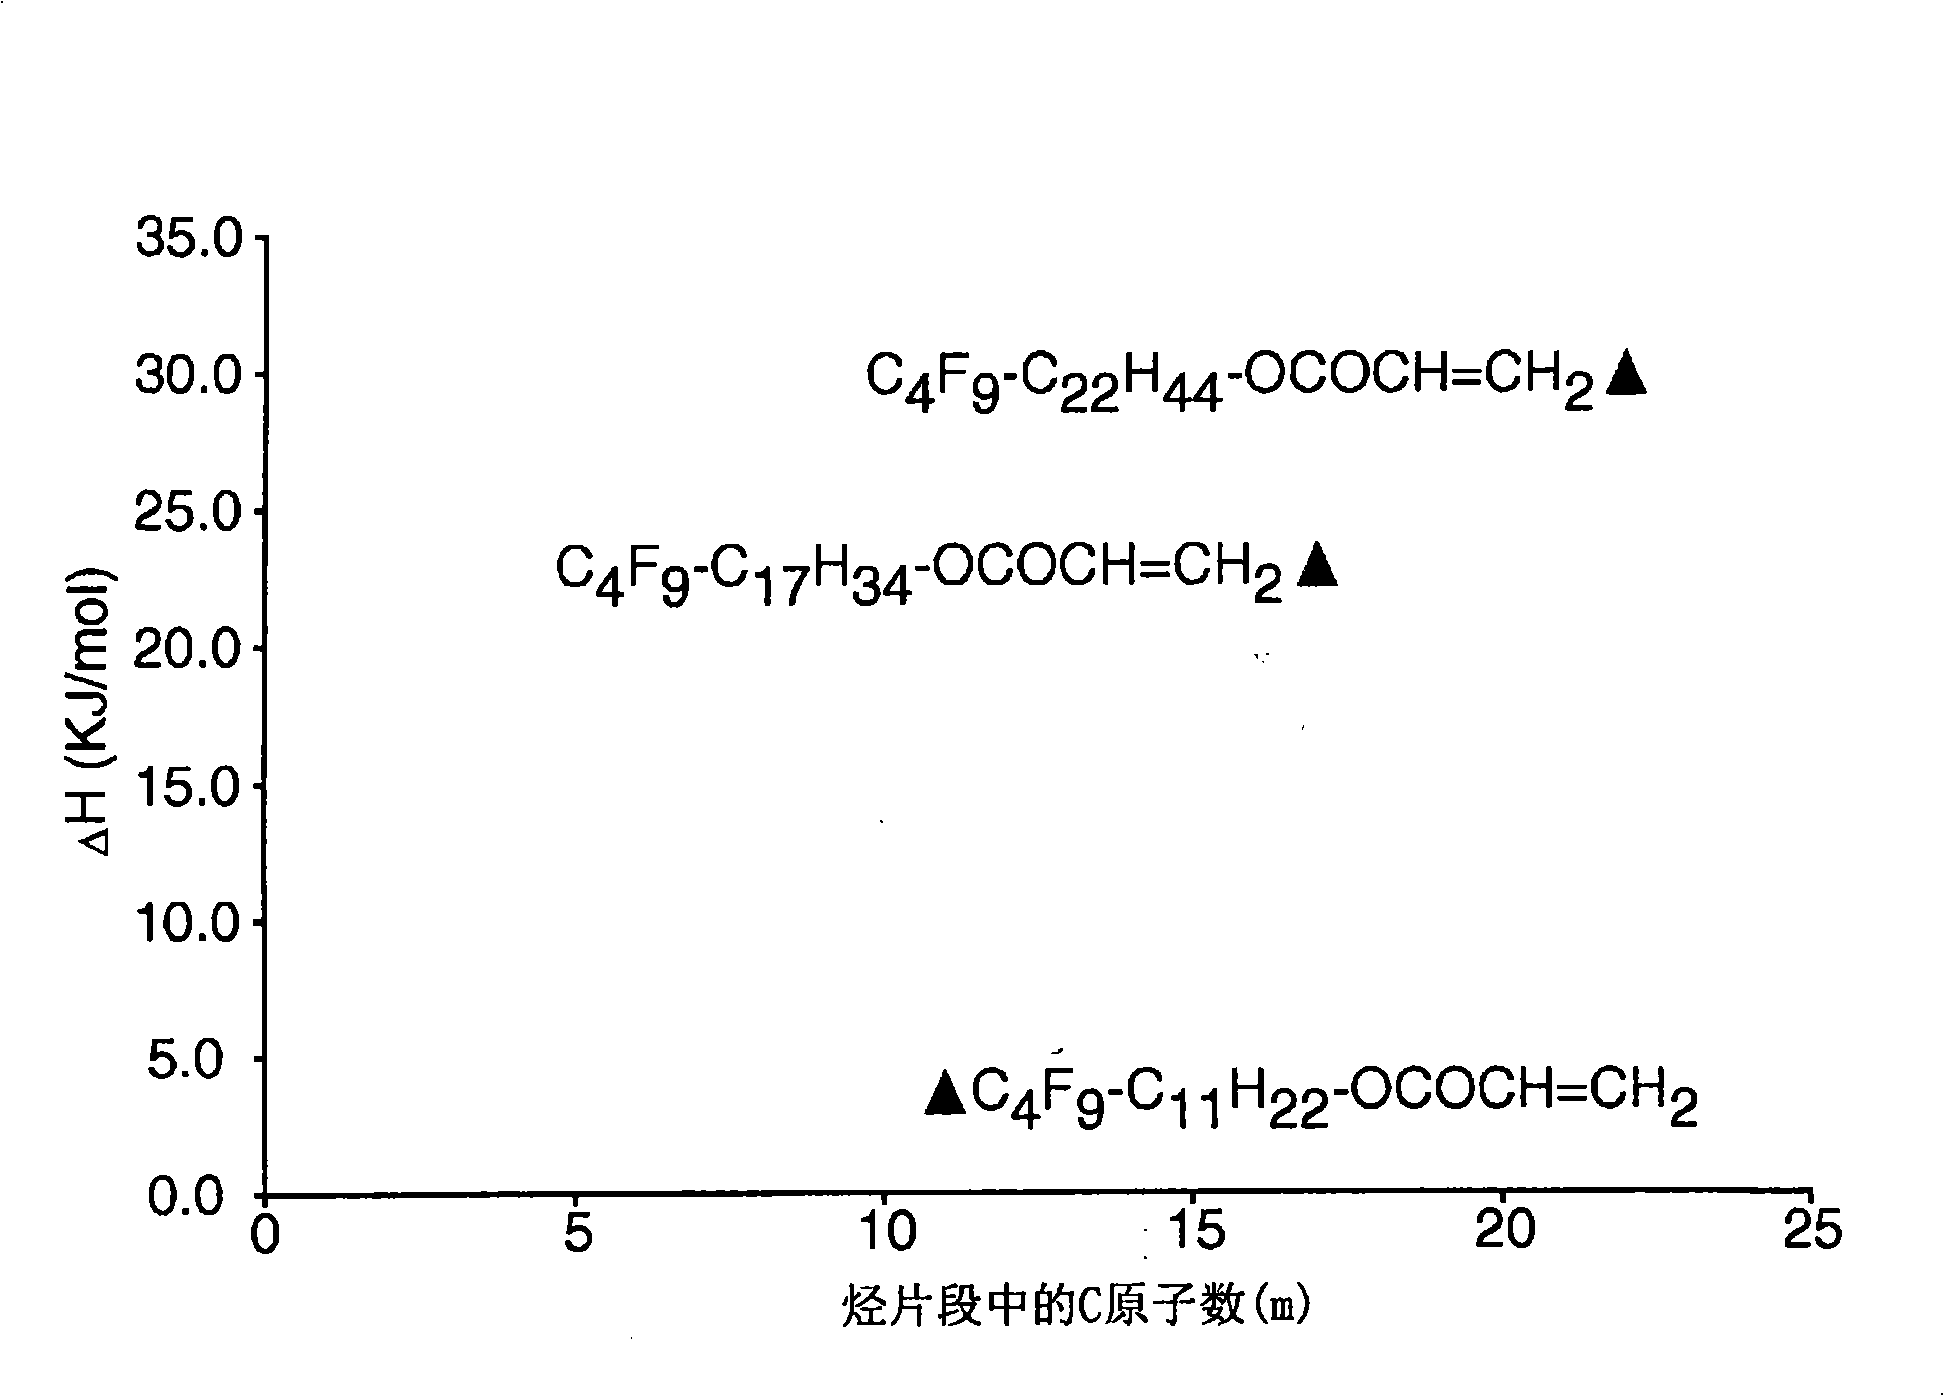 Side chain fluorochemicals with crystallizable spacer groups